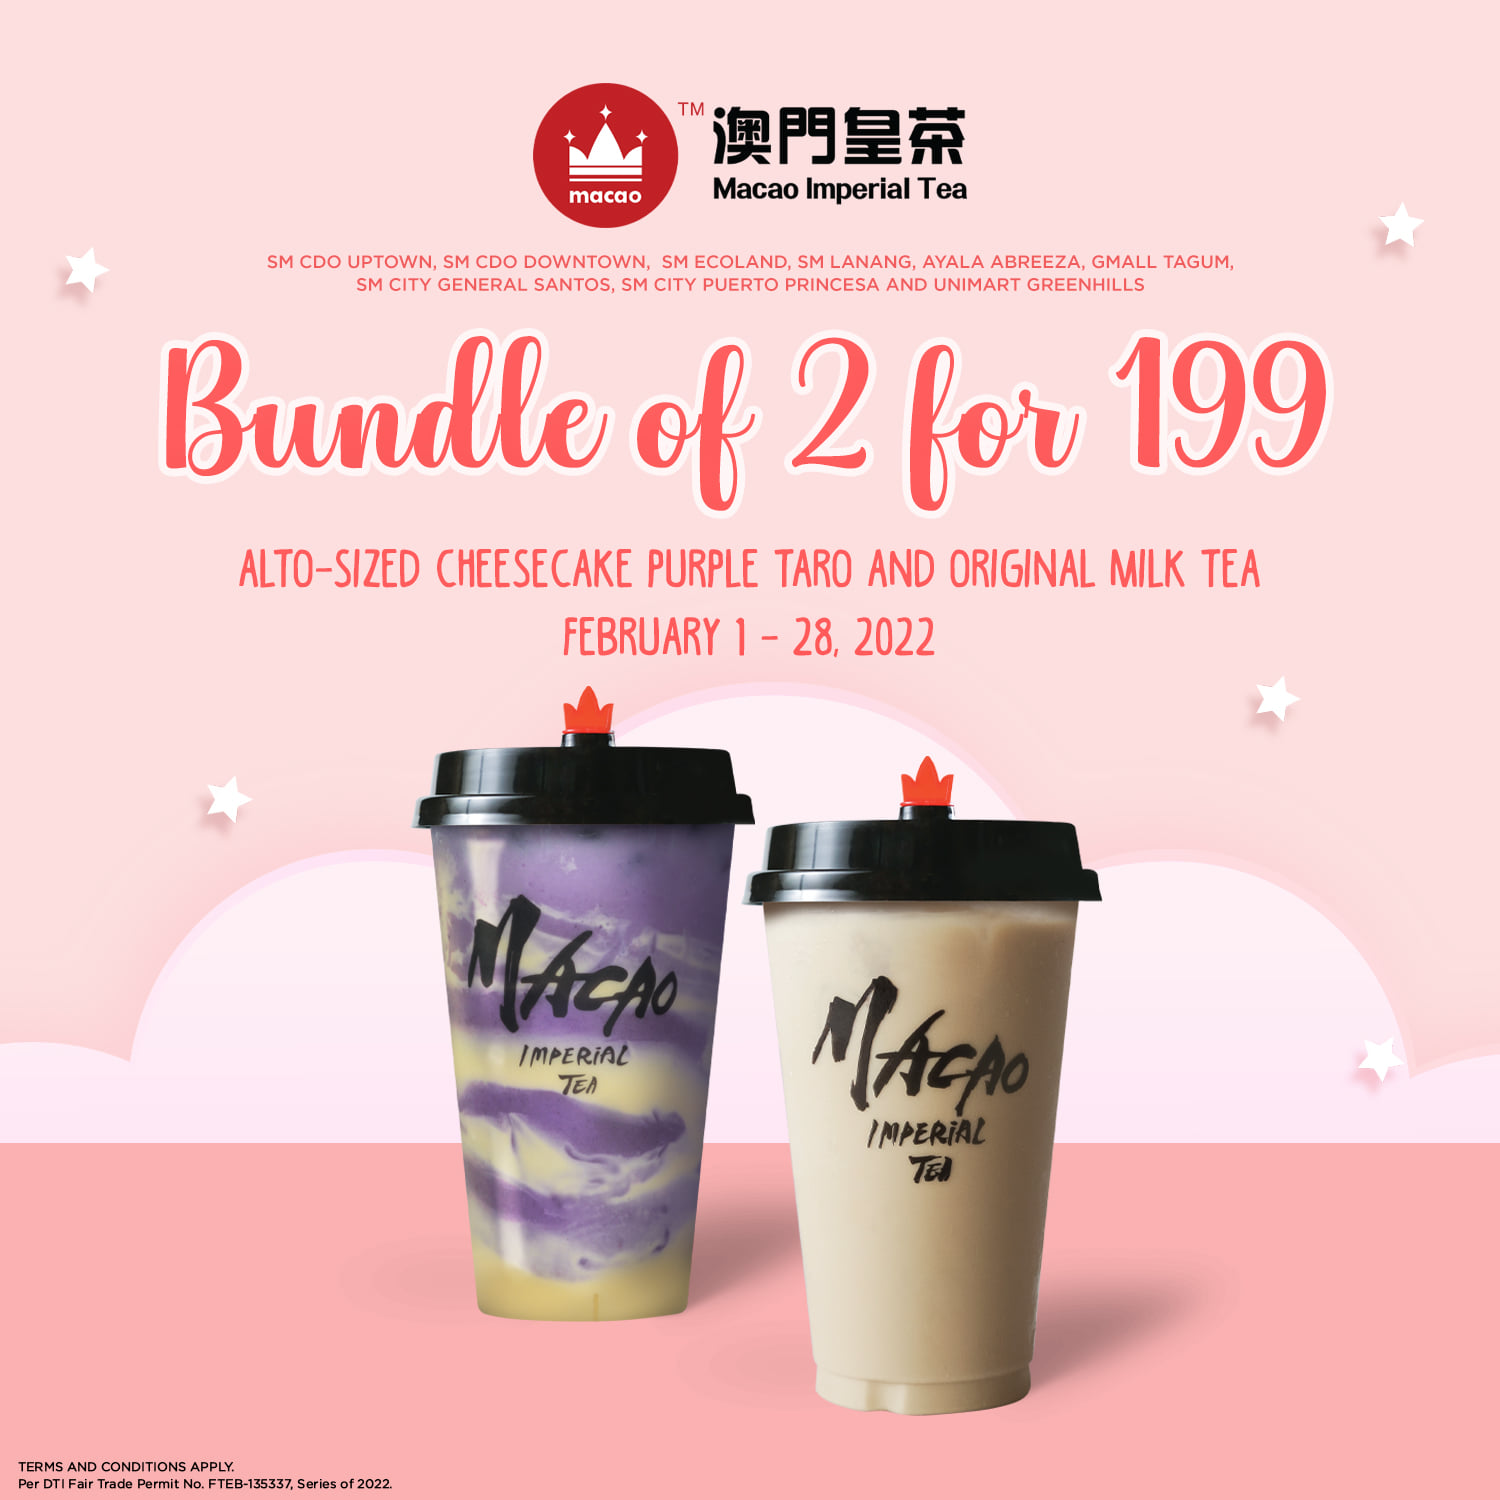 Macao Imperial Tea's Deals of the Month